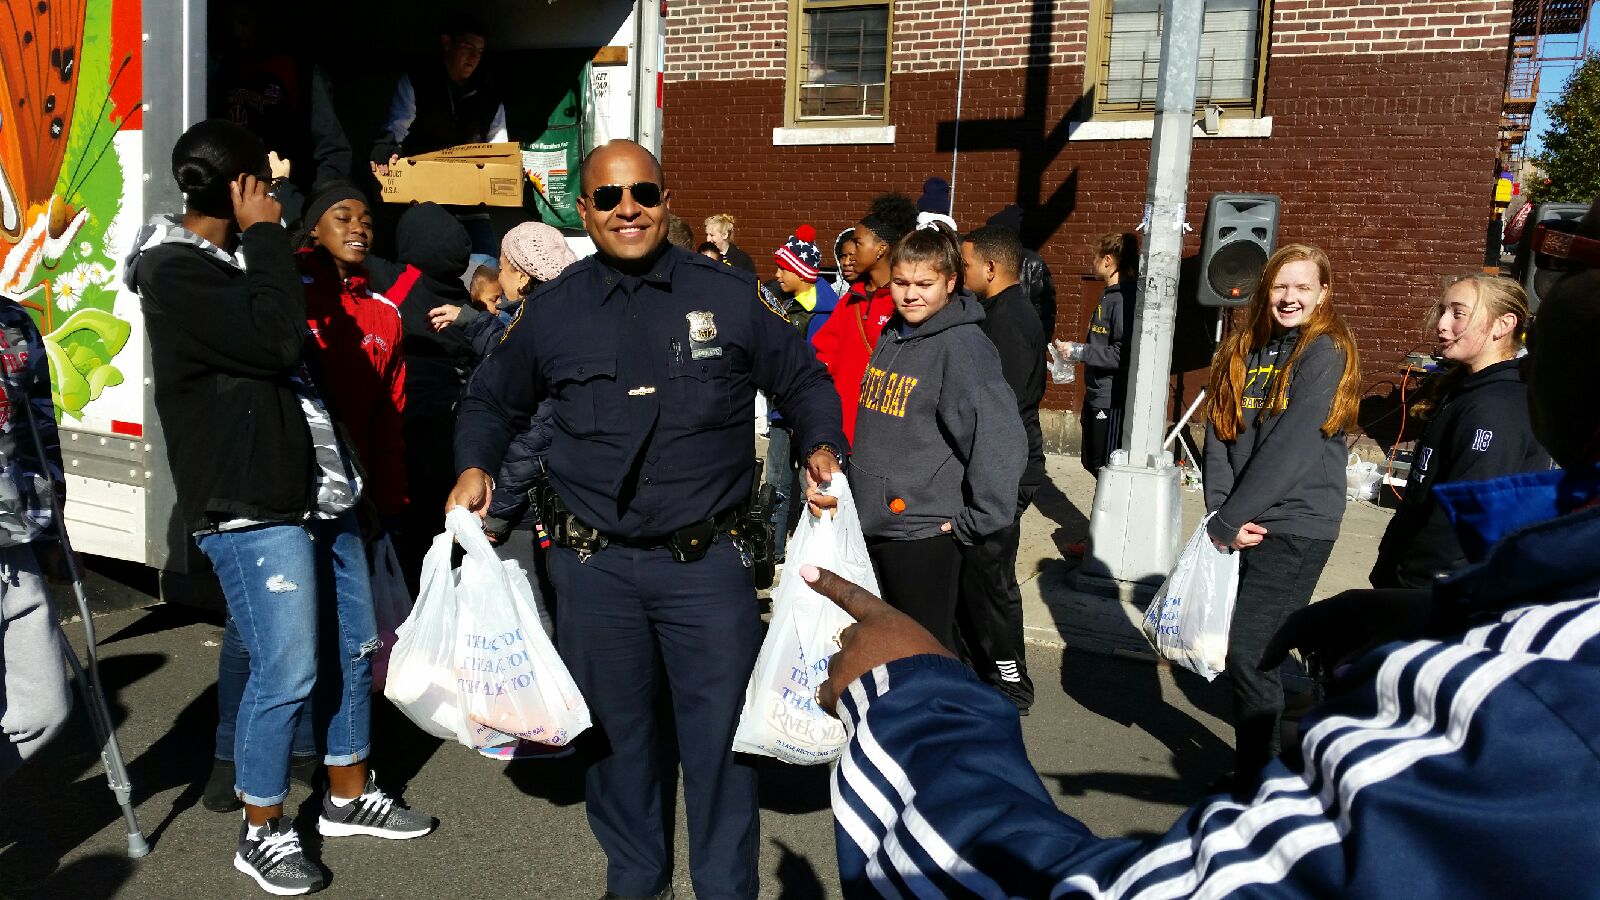 Officers from the 52 Precinct and Students from Long Island Lend a Helping Hand